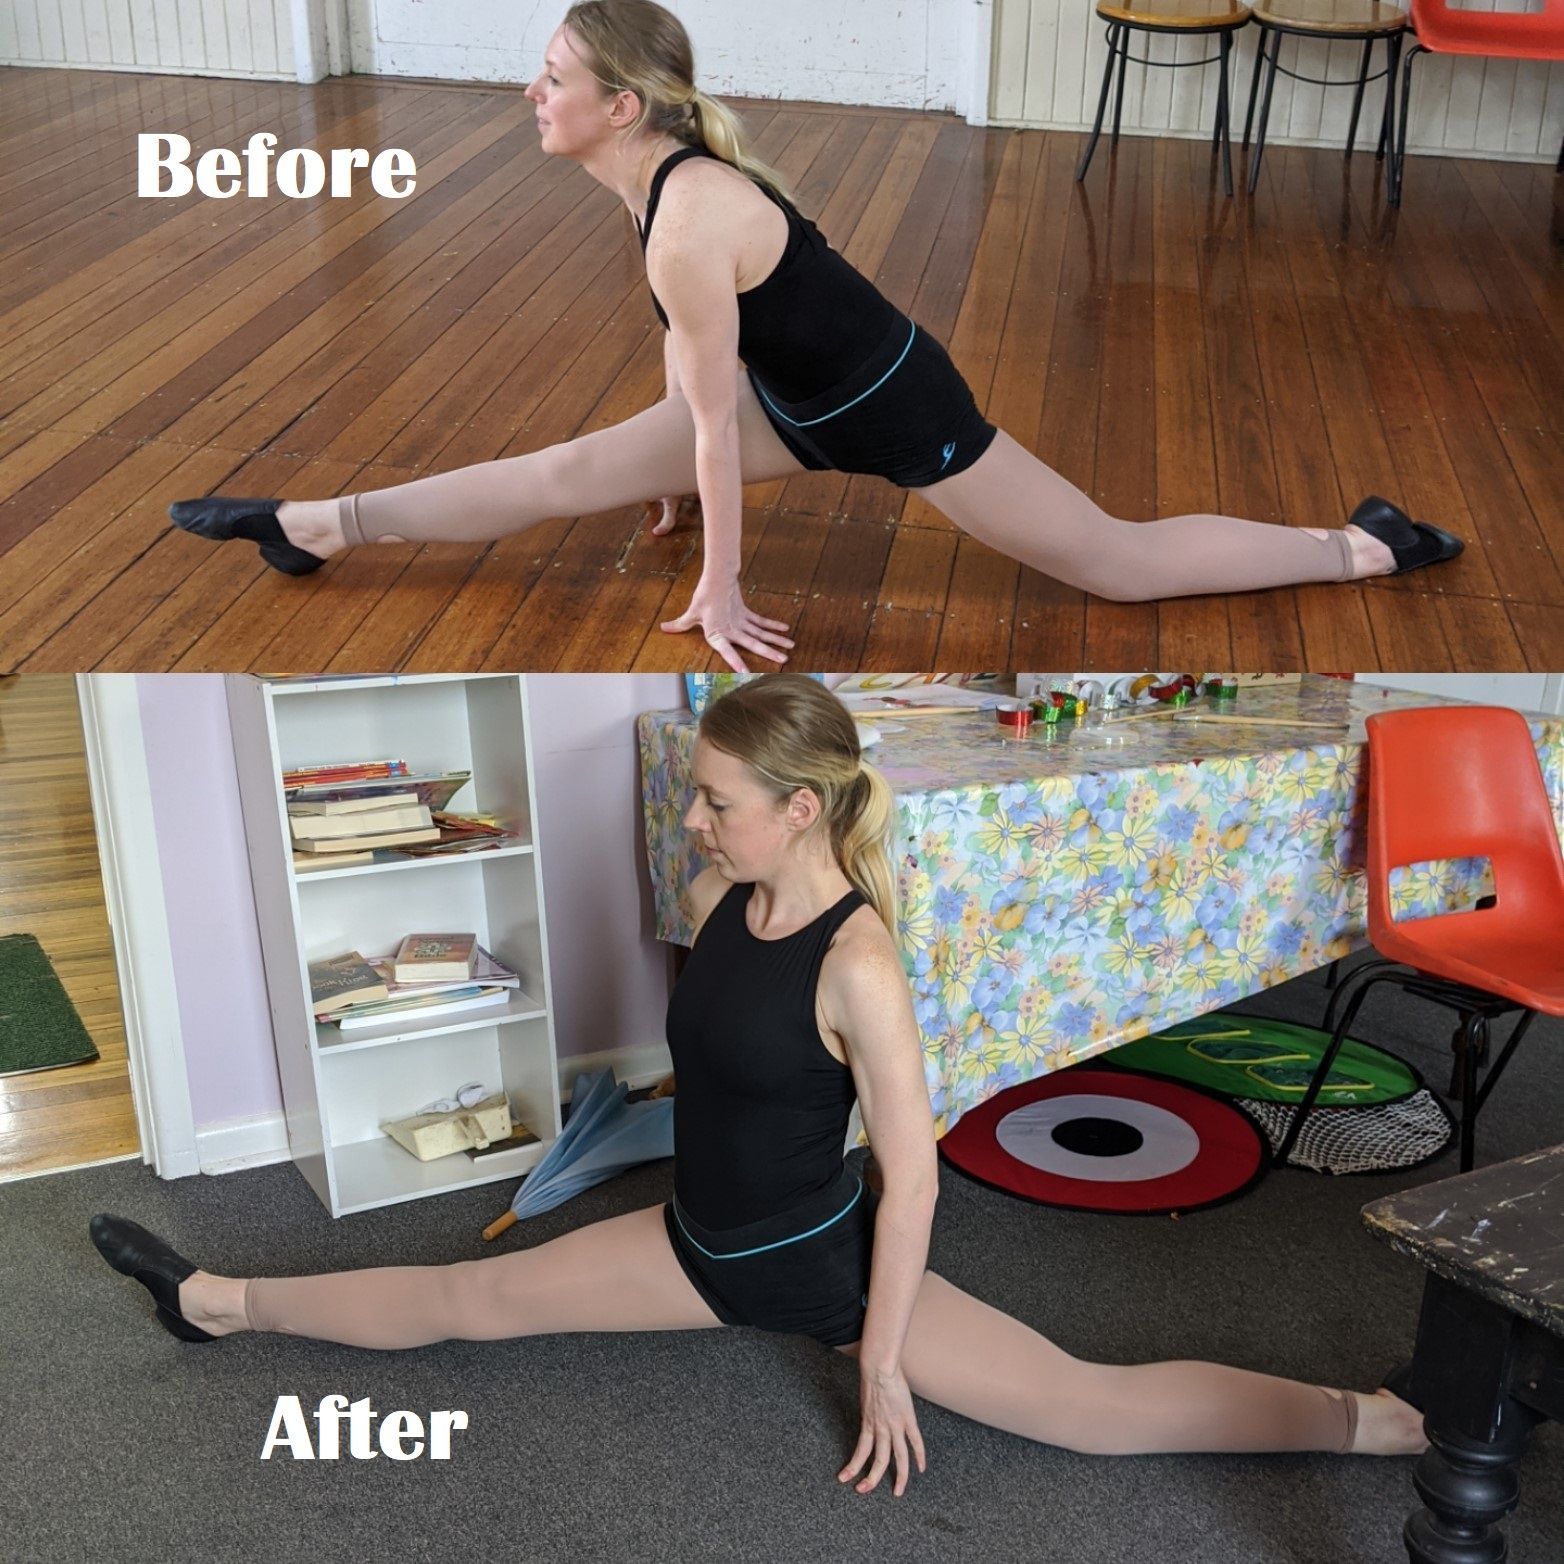 Splits & Flexibility progress from fexibility course "Flexibility for Dancers Held Back by Tightness"